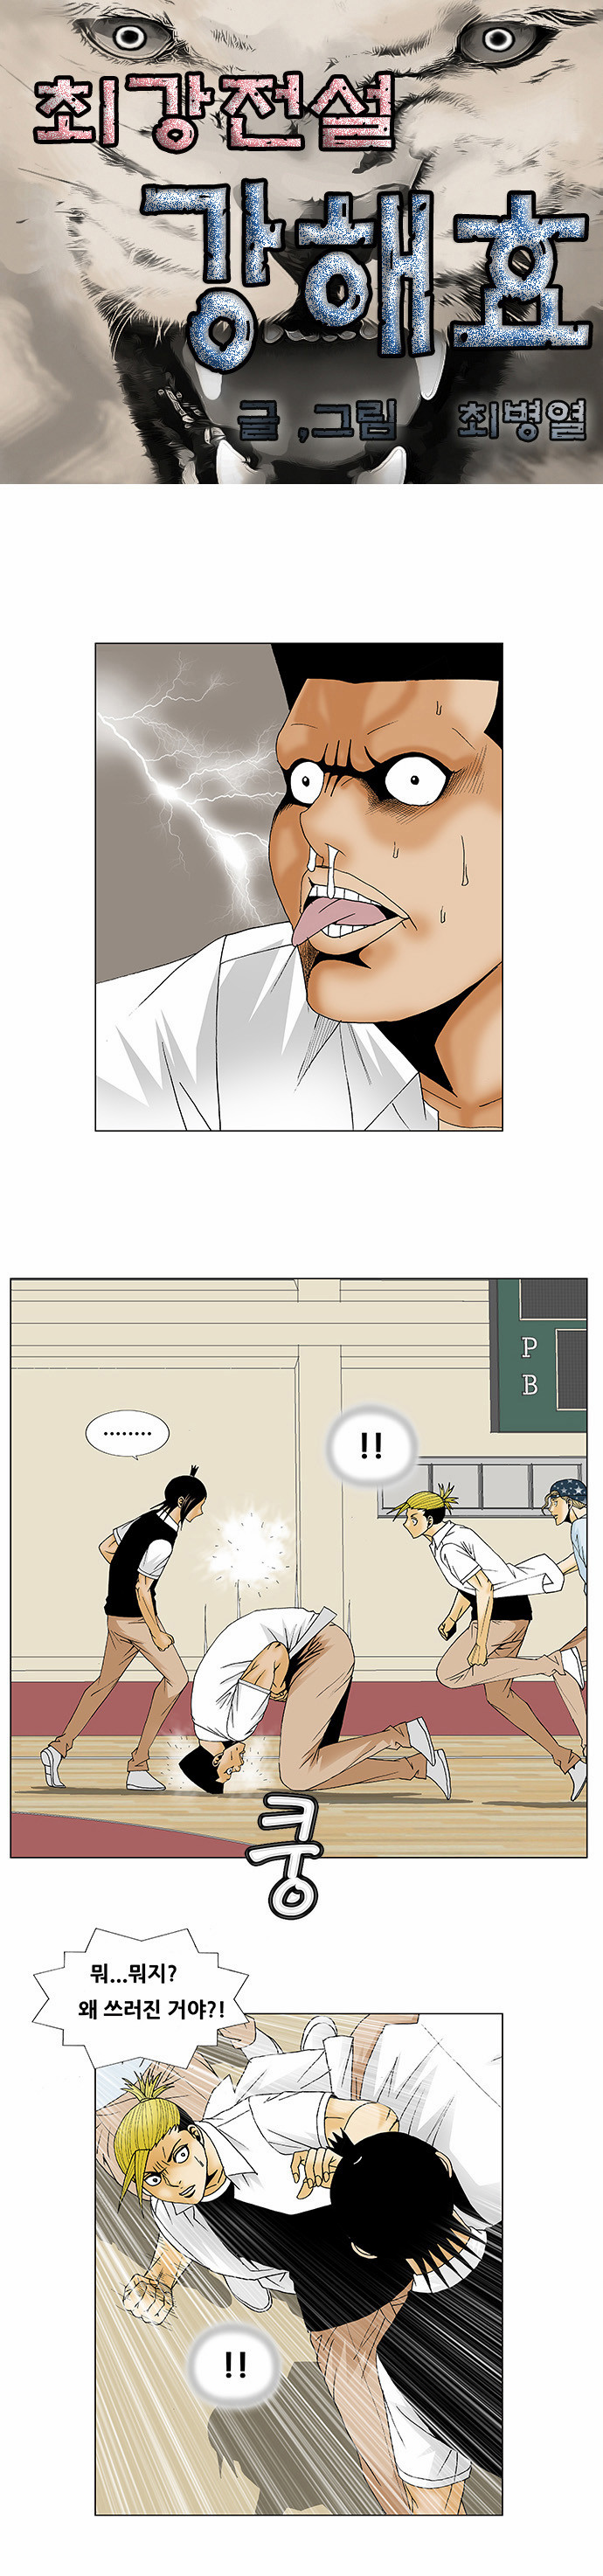 Ultimate Legend - Kang Hae Hyo - Chapter 117 - Page 3